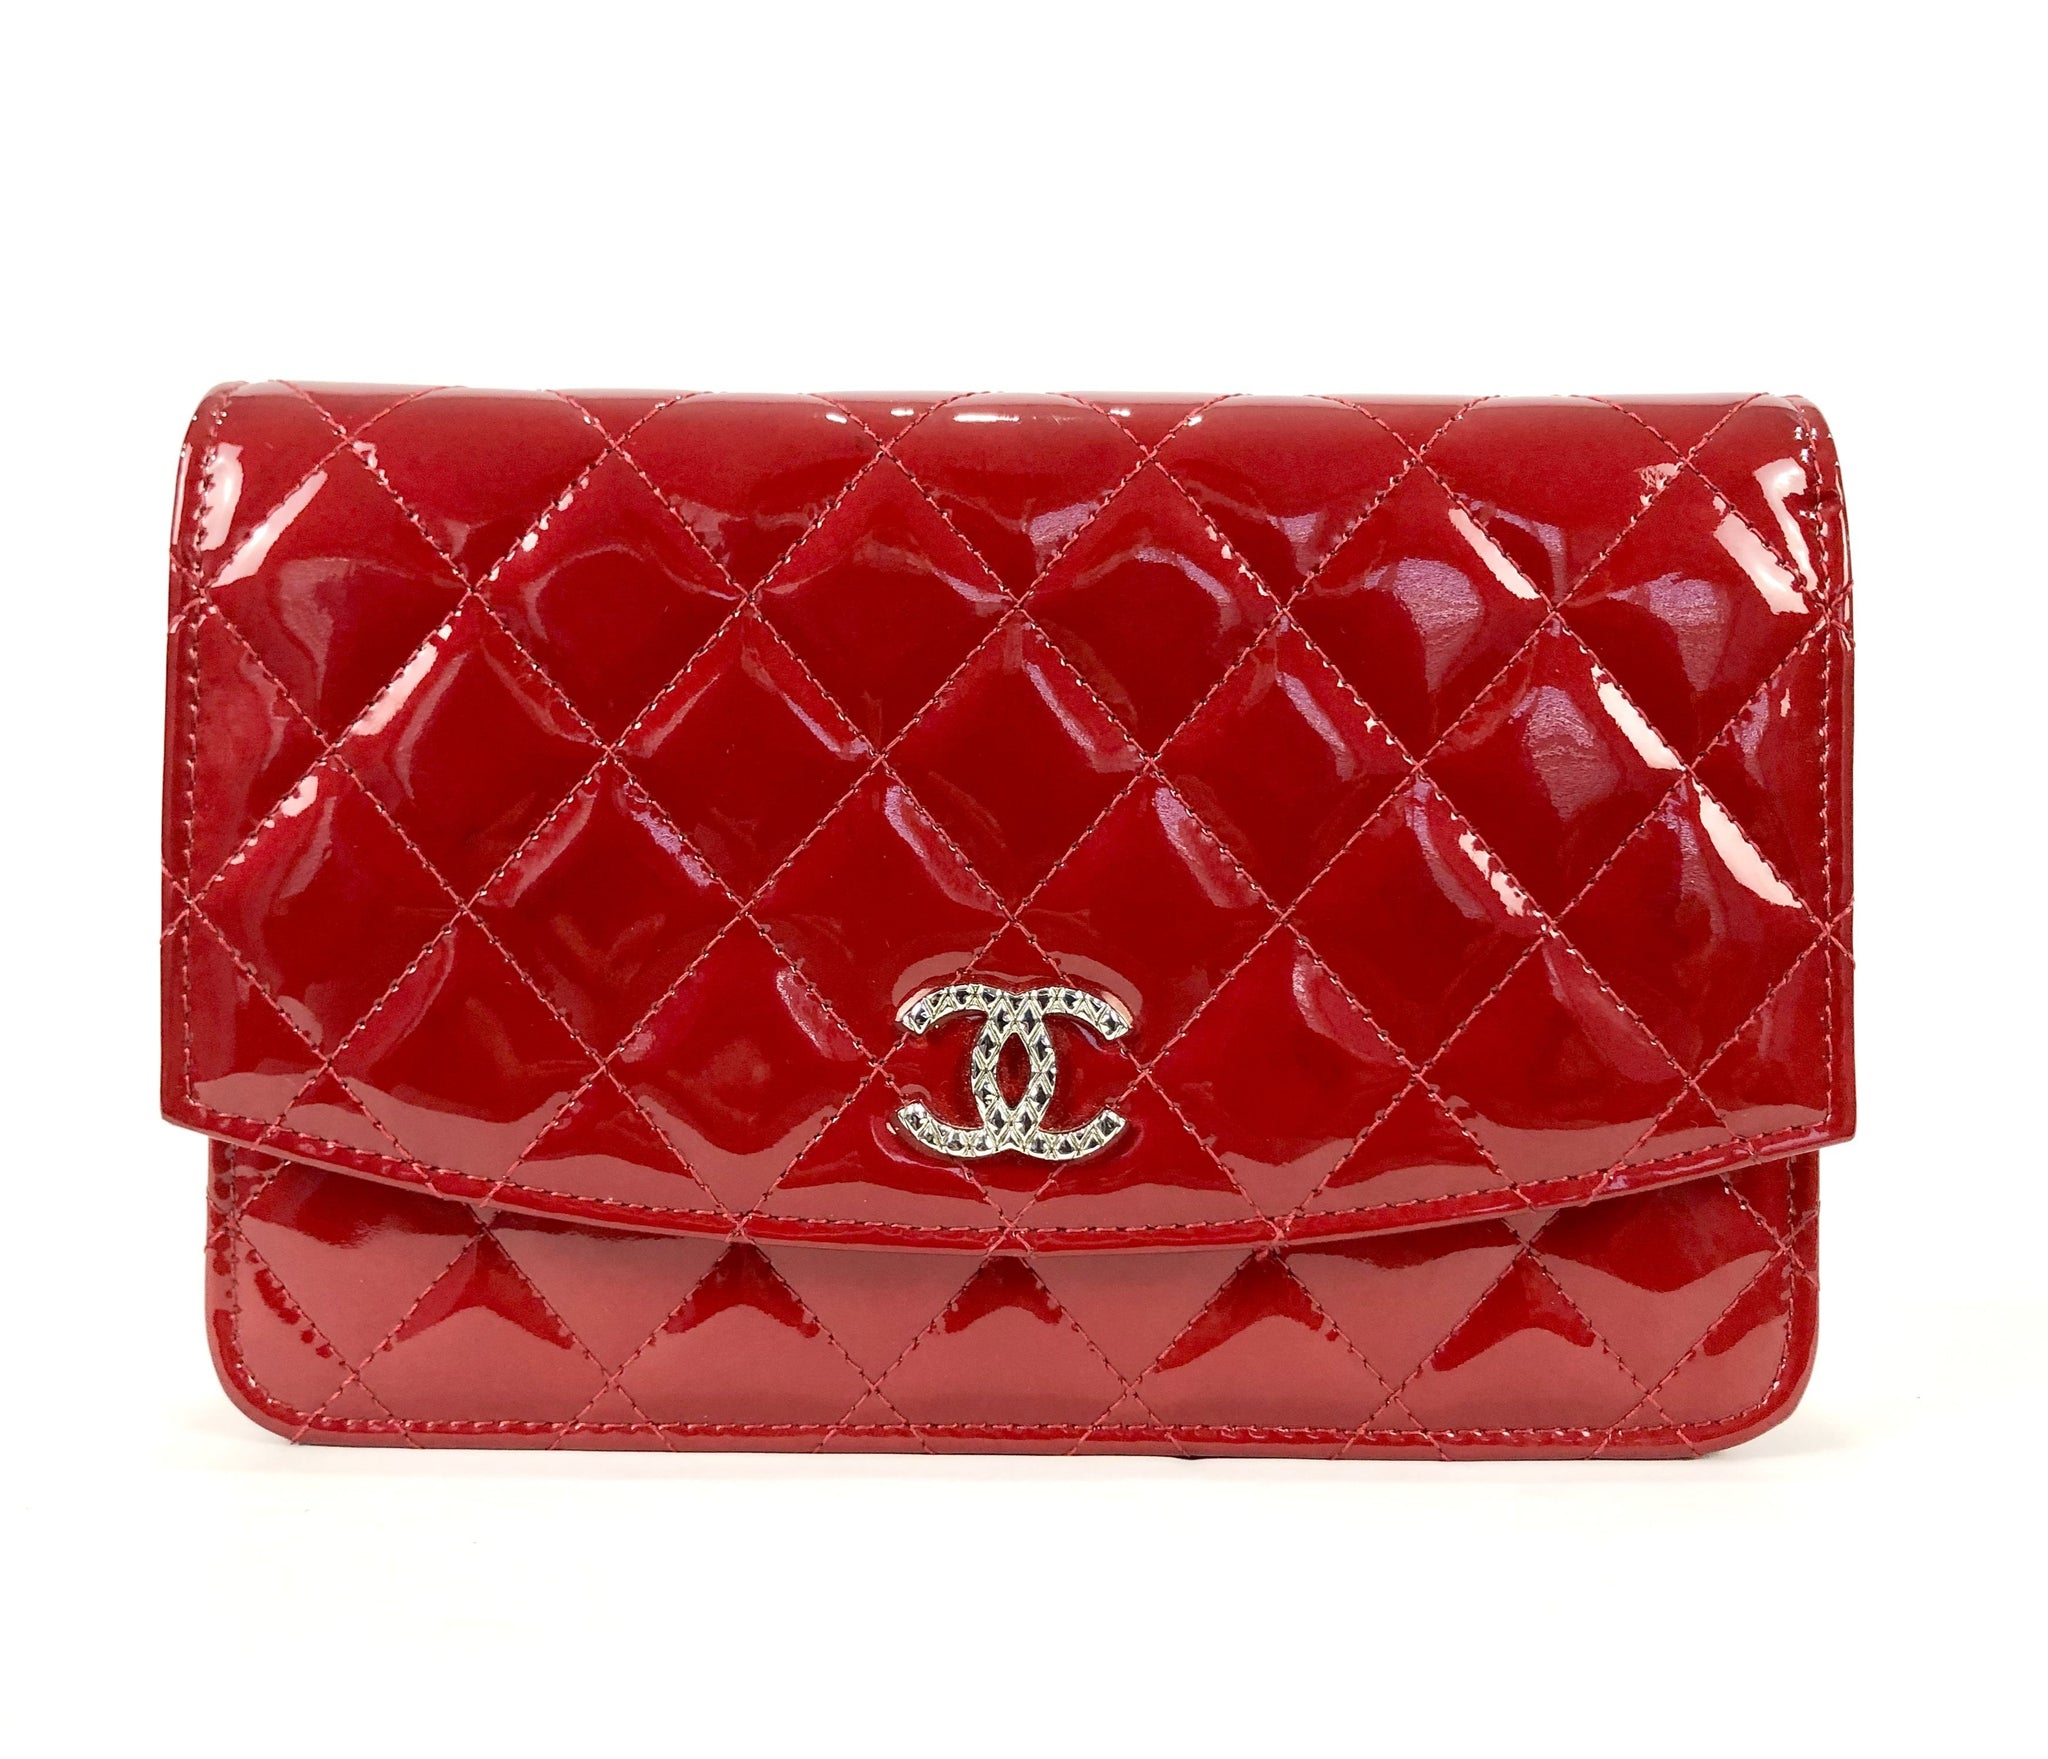 chanel red patent leather wallet